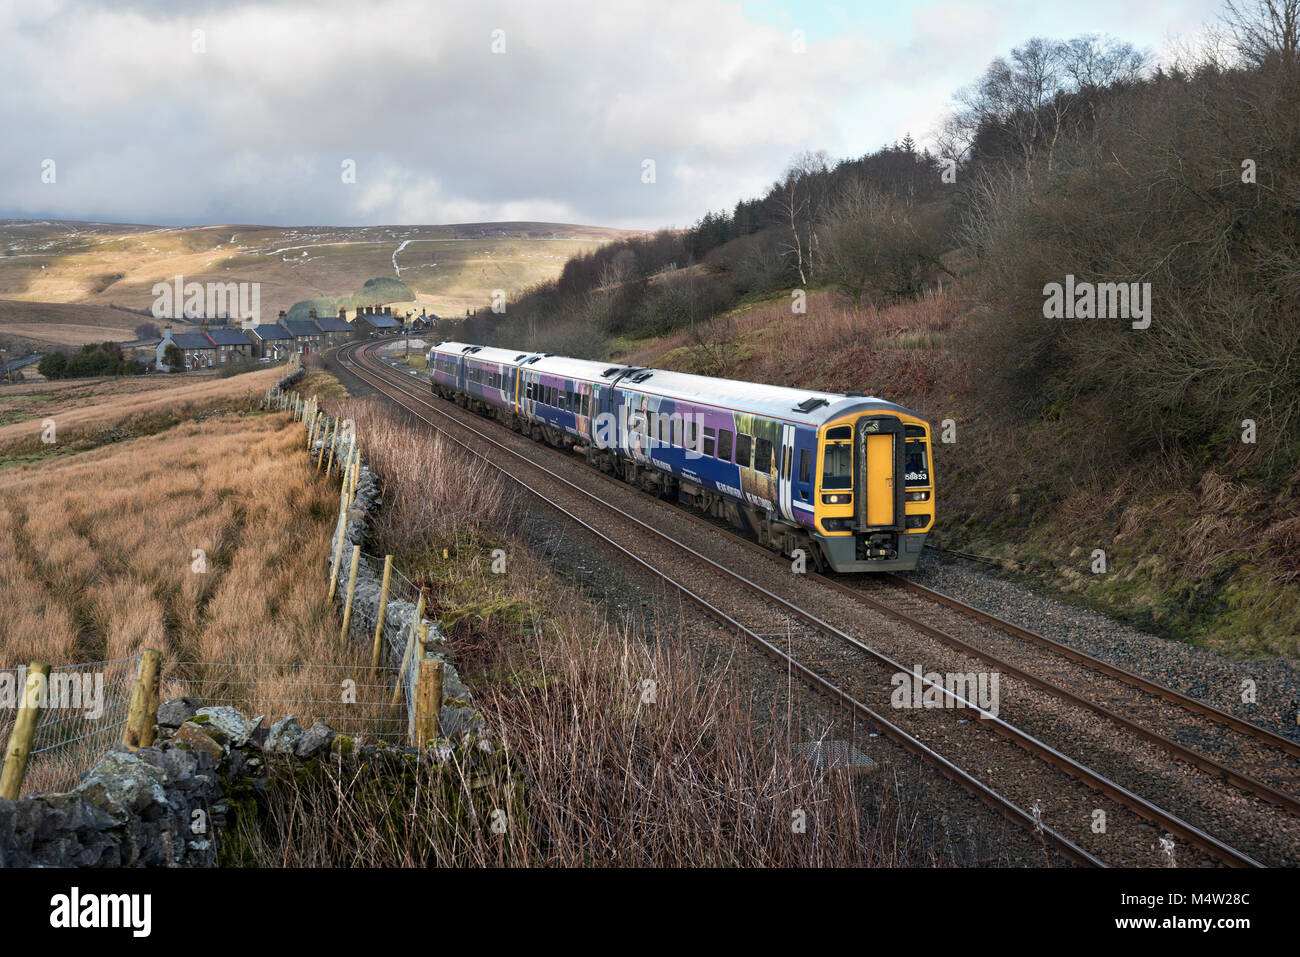 Sprinter passenger train from Carlisle passes through Garsdale in the Yorkshire Dales National park, en route for Leeds, UK. Stock Photo